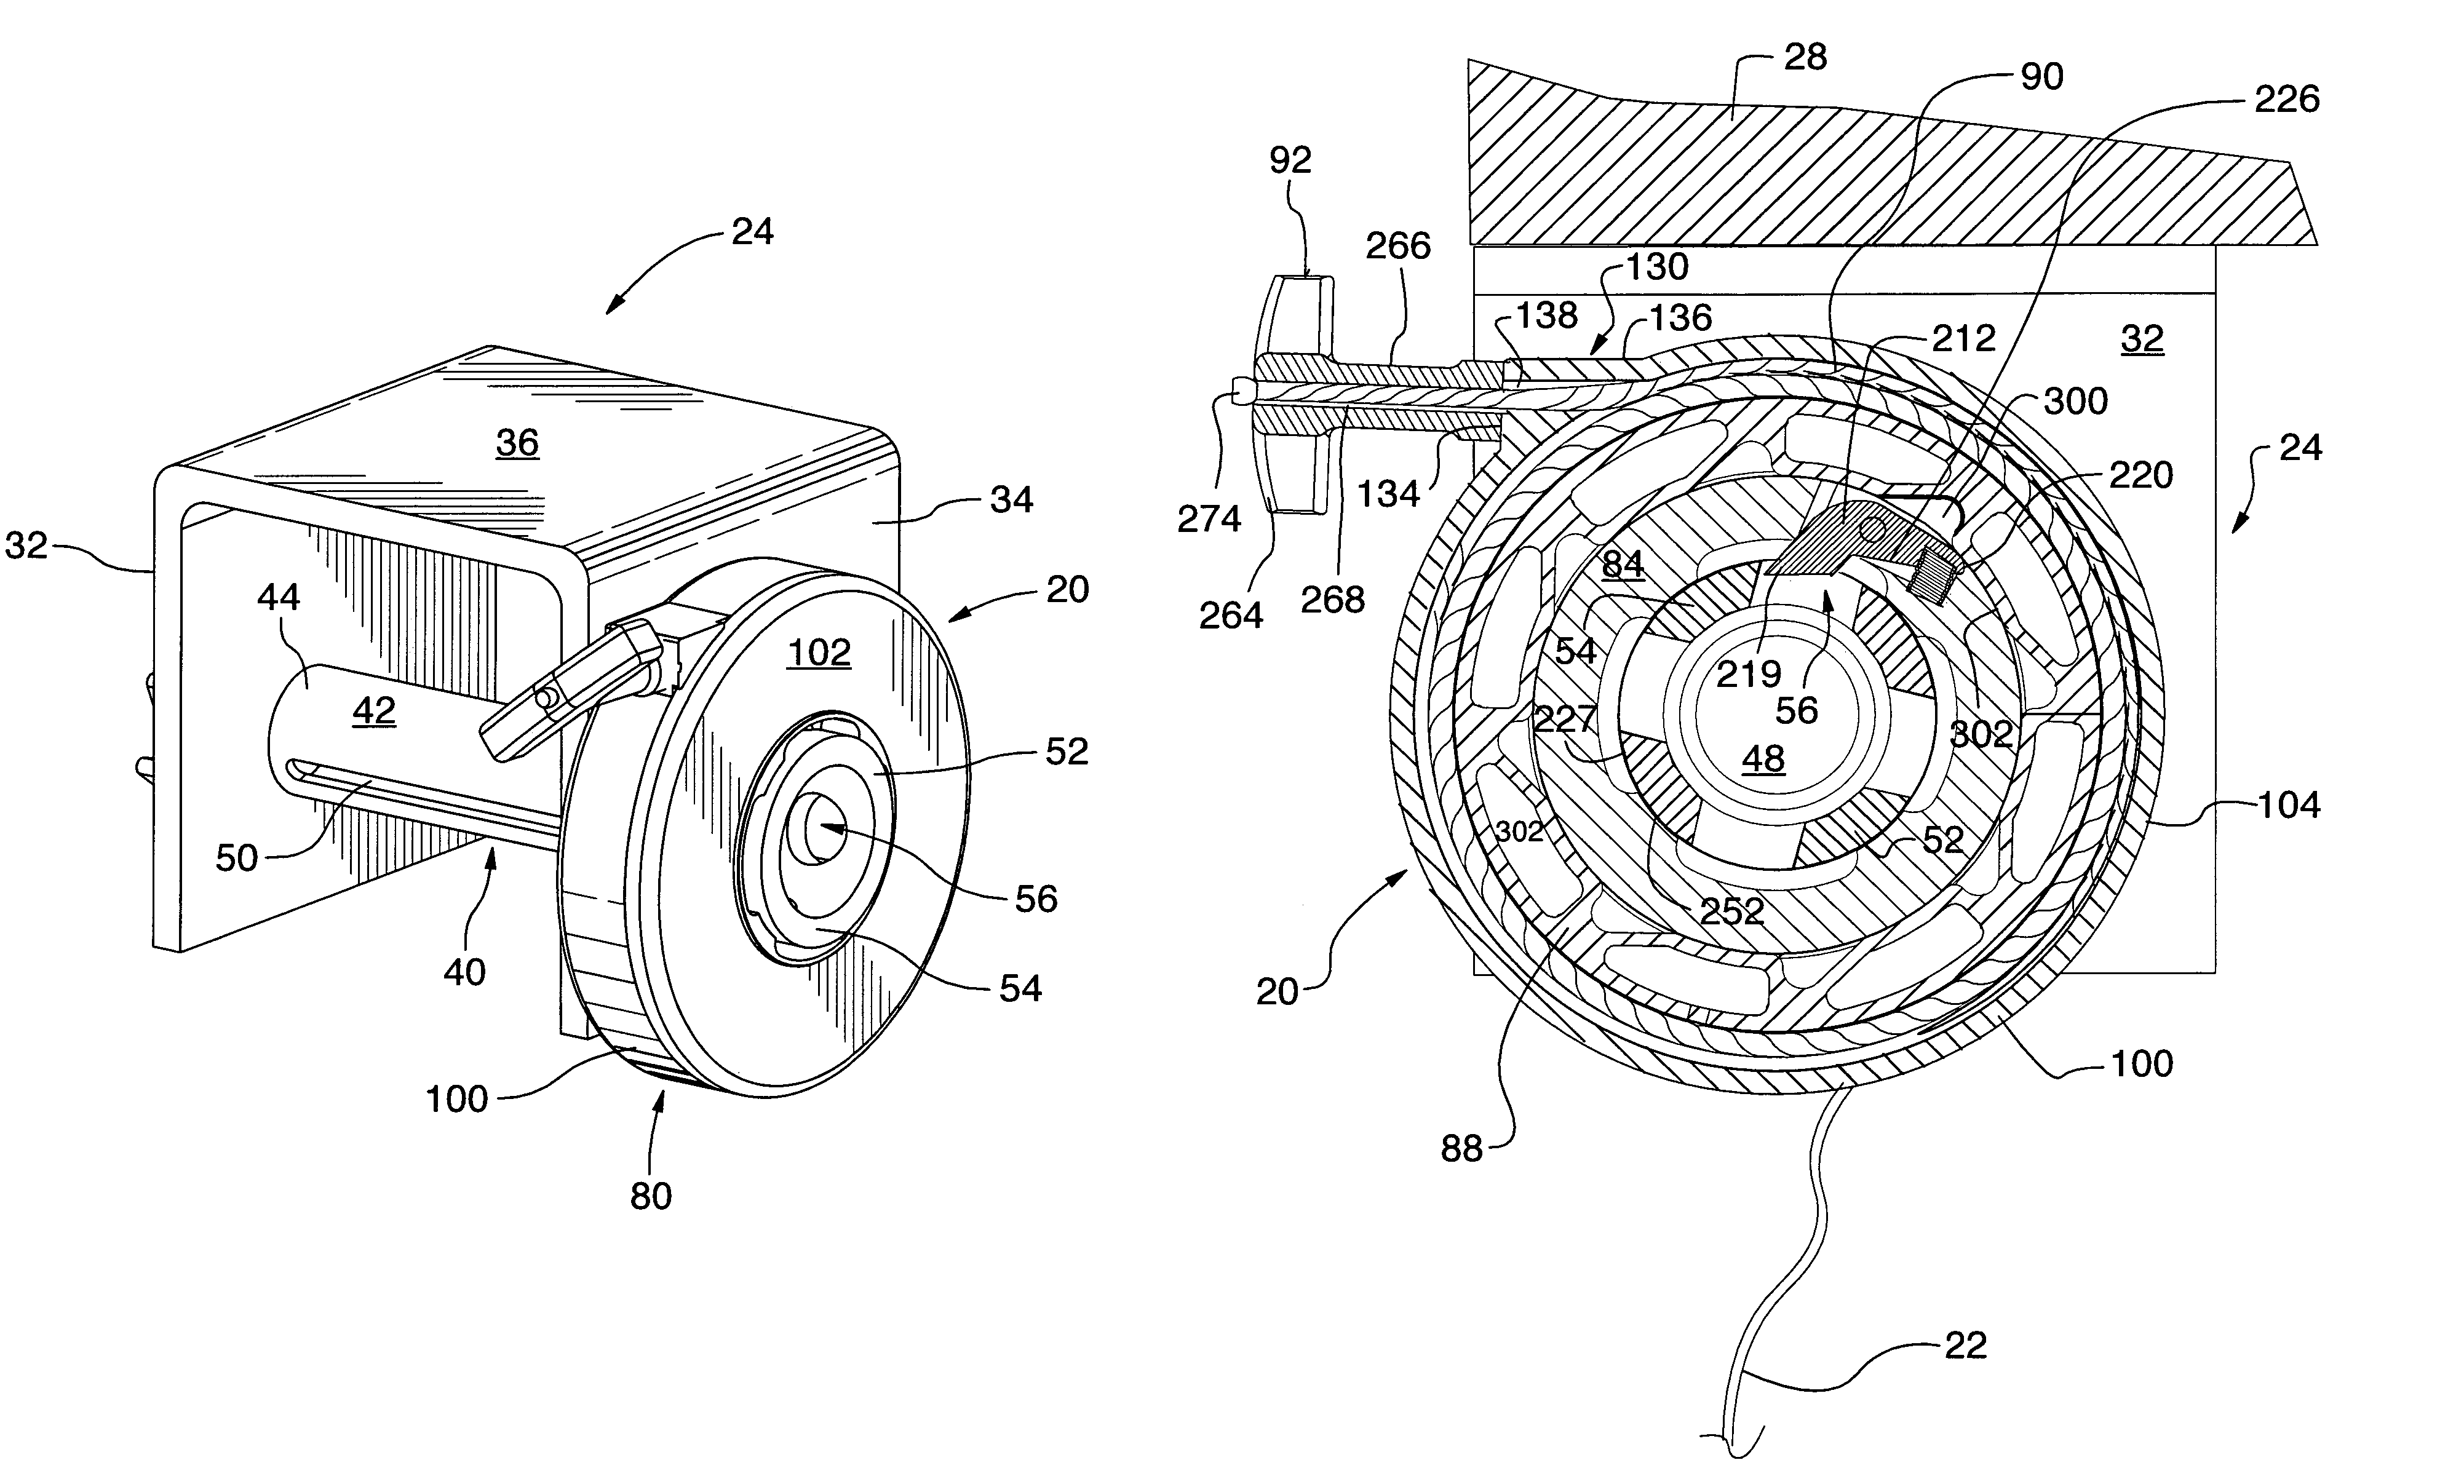 Apparatus for winding an elongate strap onto a winch